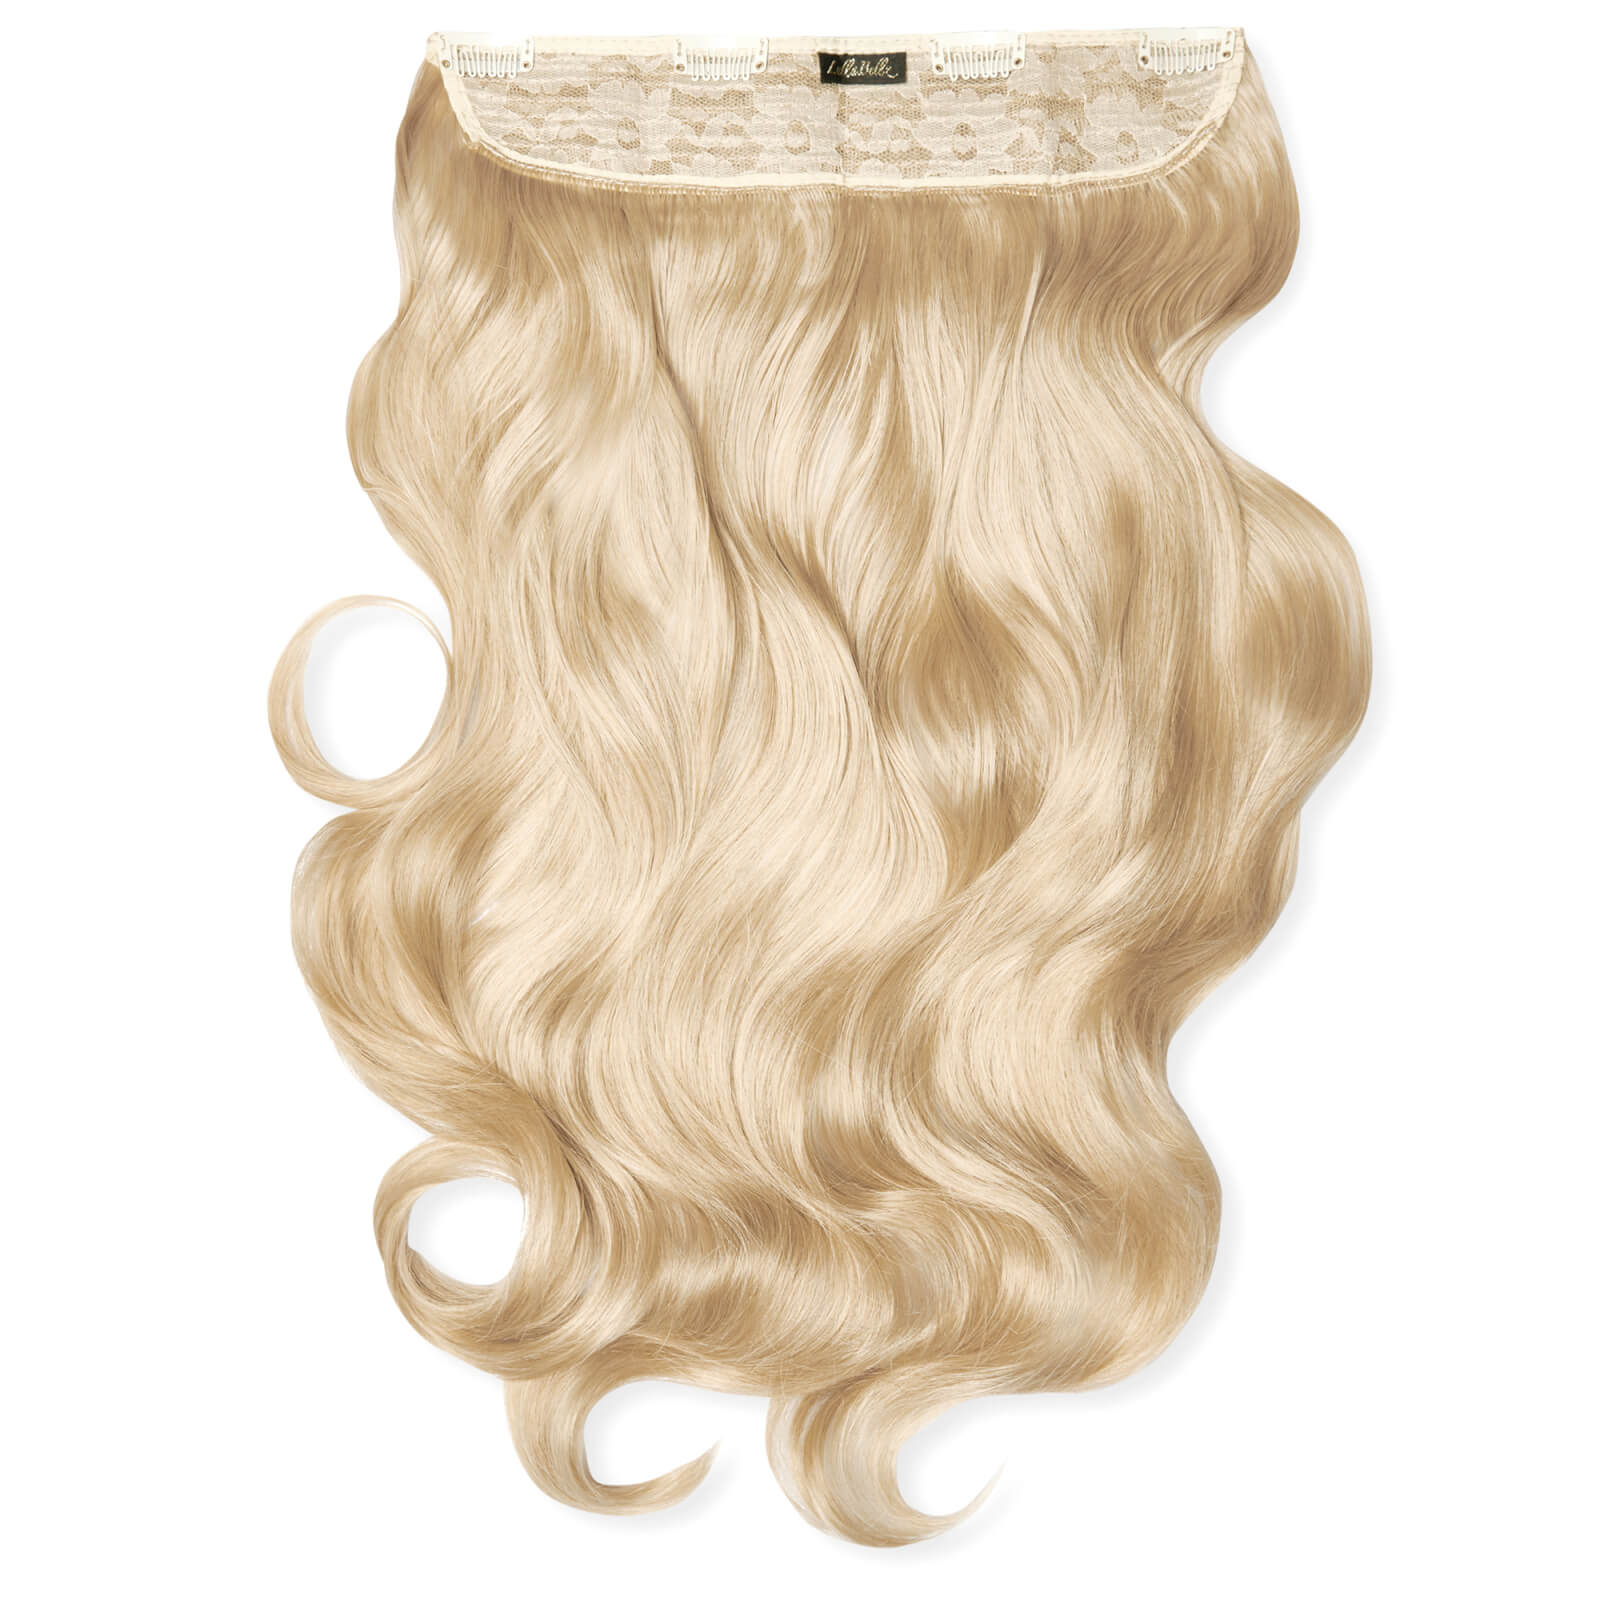 LullaBellz Thick 20 1-Piece Curly Clip in Hair Extensions (Various Colours) - Light Blonde